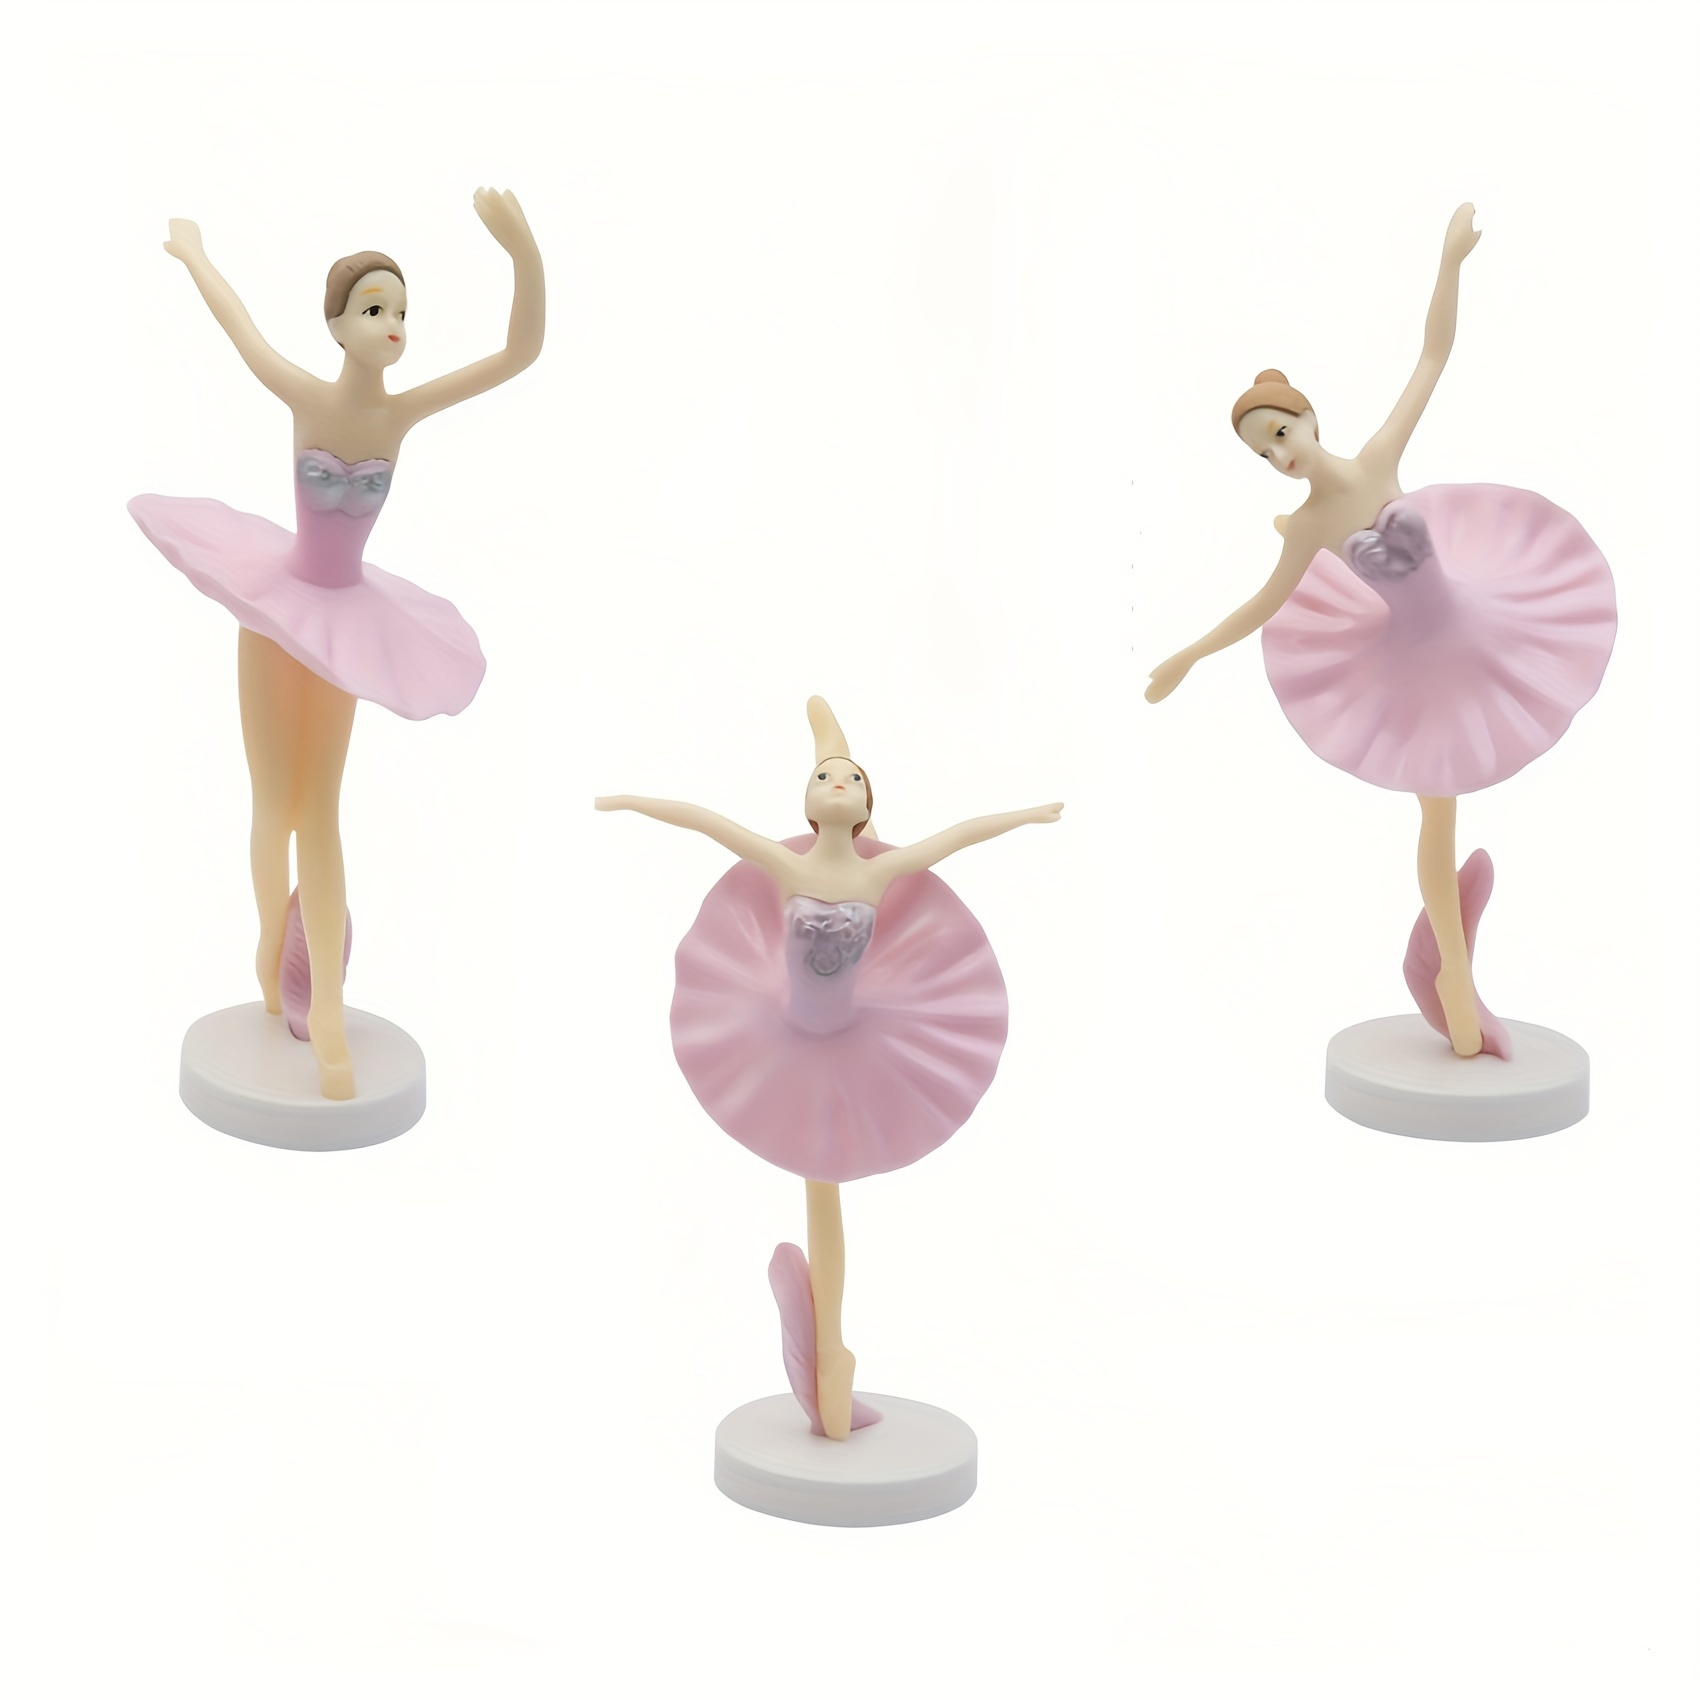 

3-piece Set Charming Ballerina Girl Anime Figures - Suitable For Cake Toppers, Car Dashboard & Home Decor | Great Gift Option